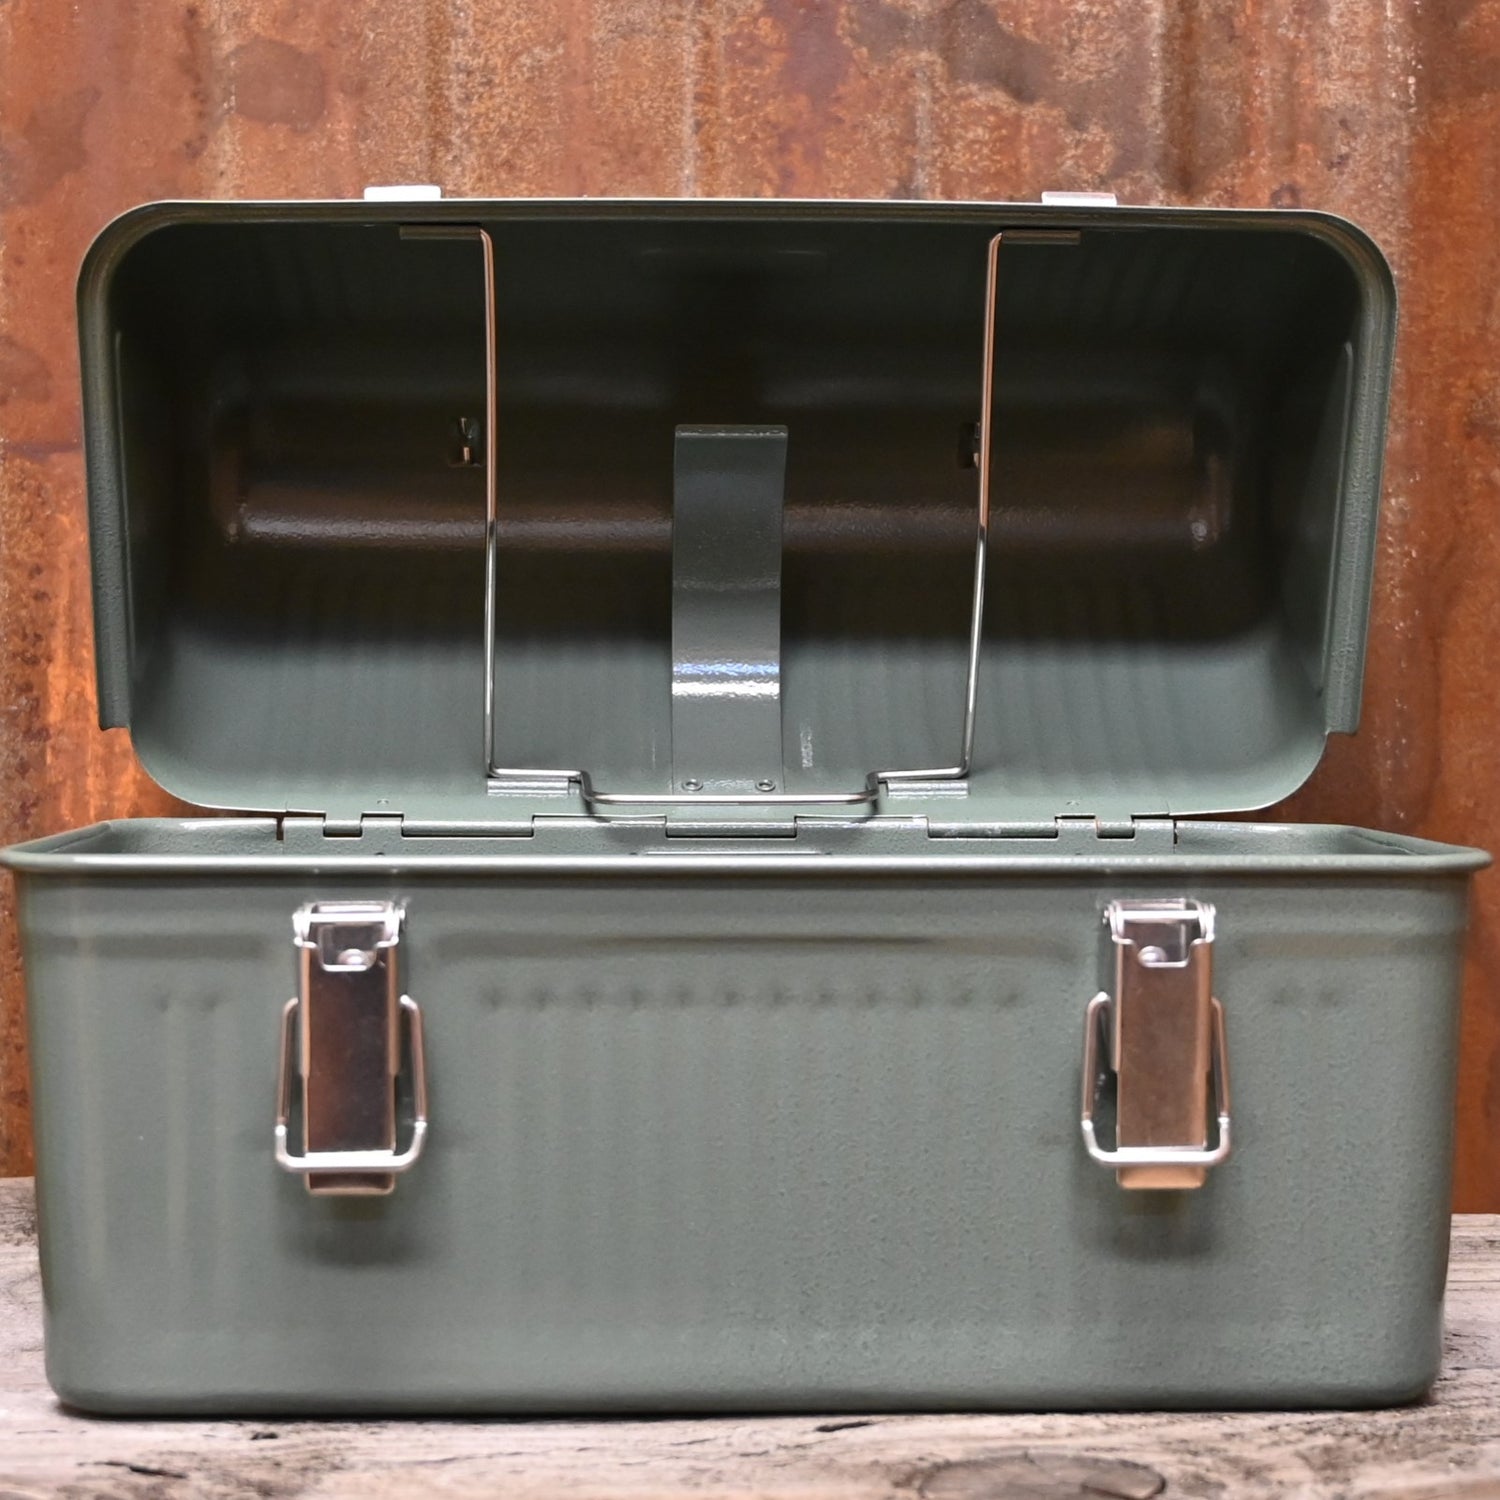 Stanley Classic Lunch Box In Hammertone Greenview of inside